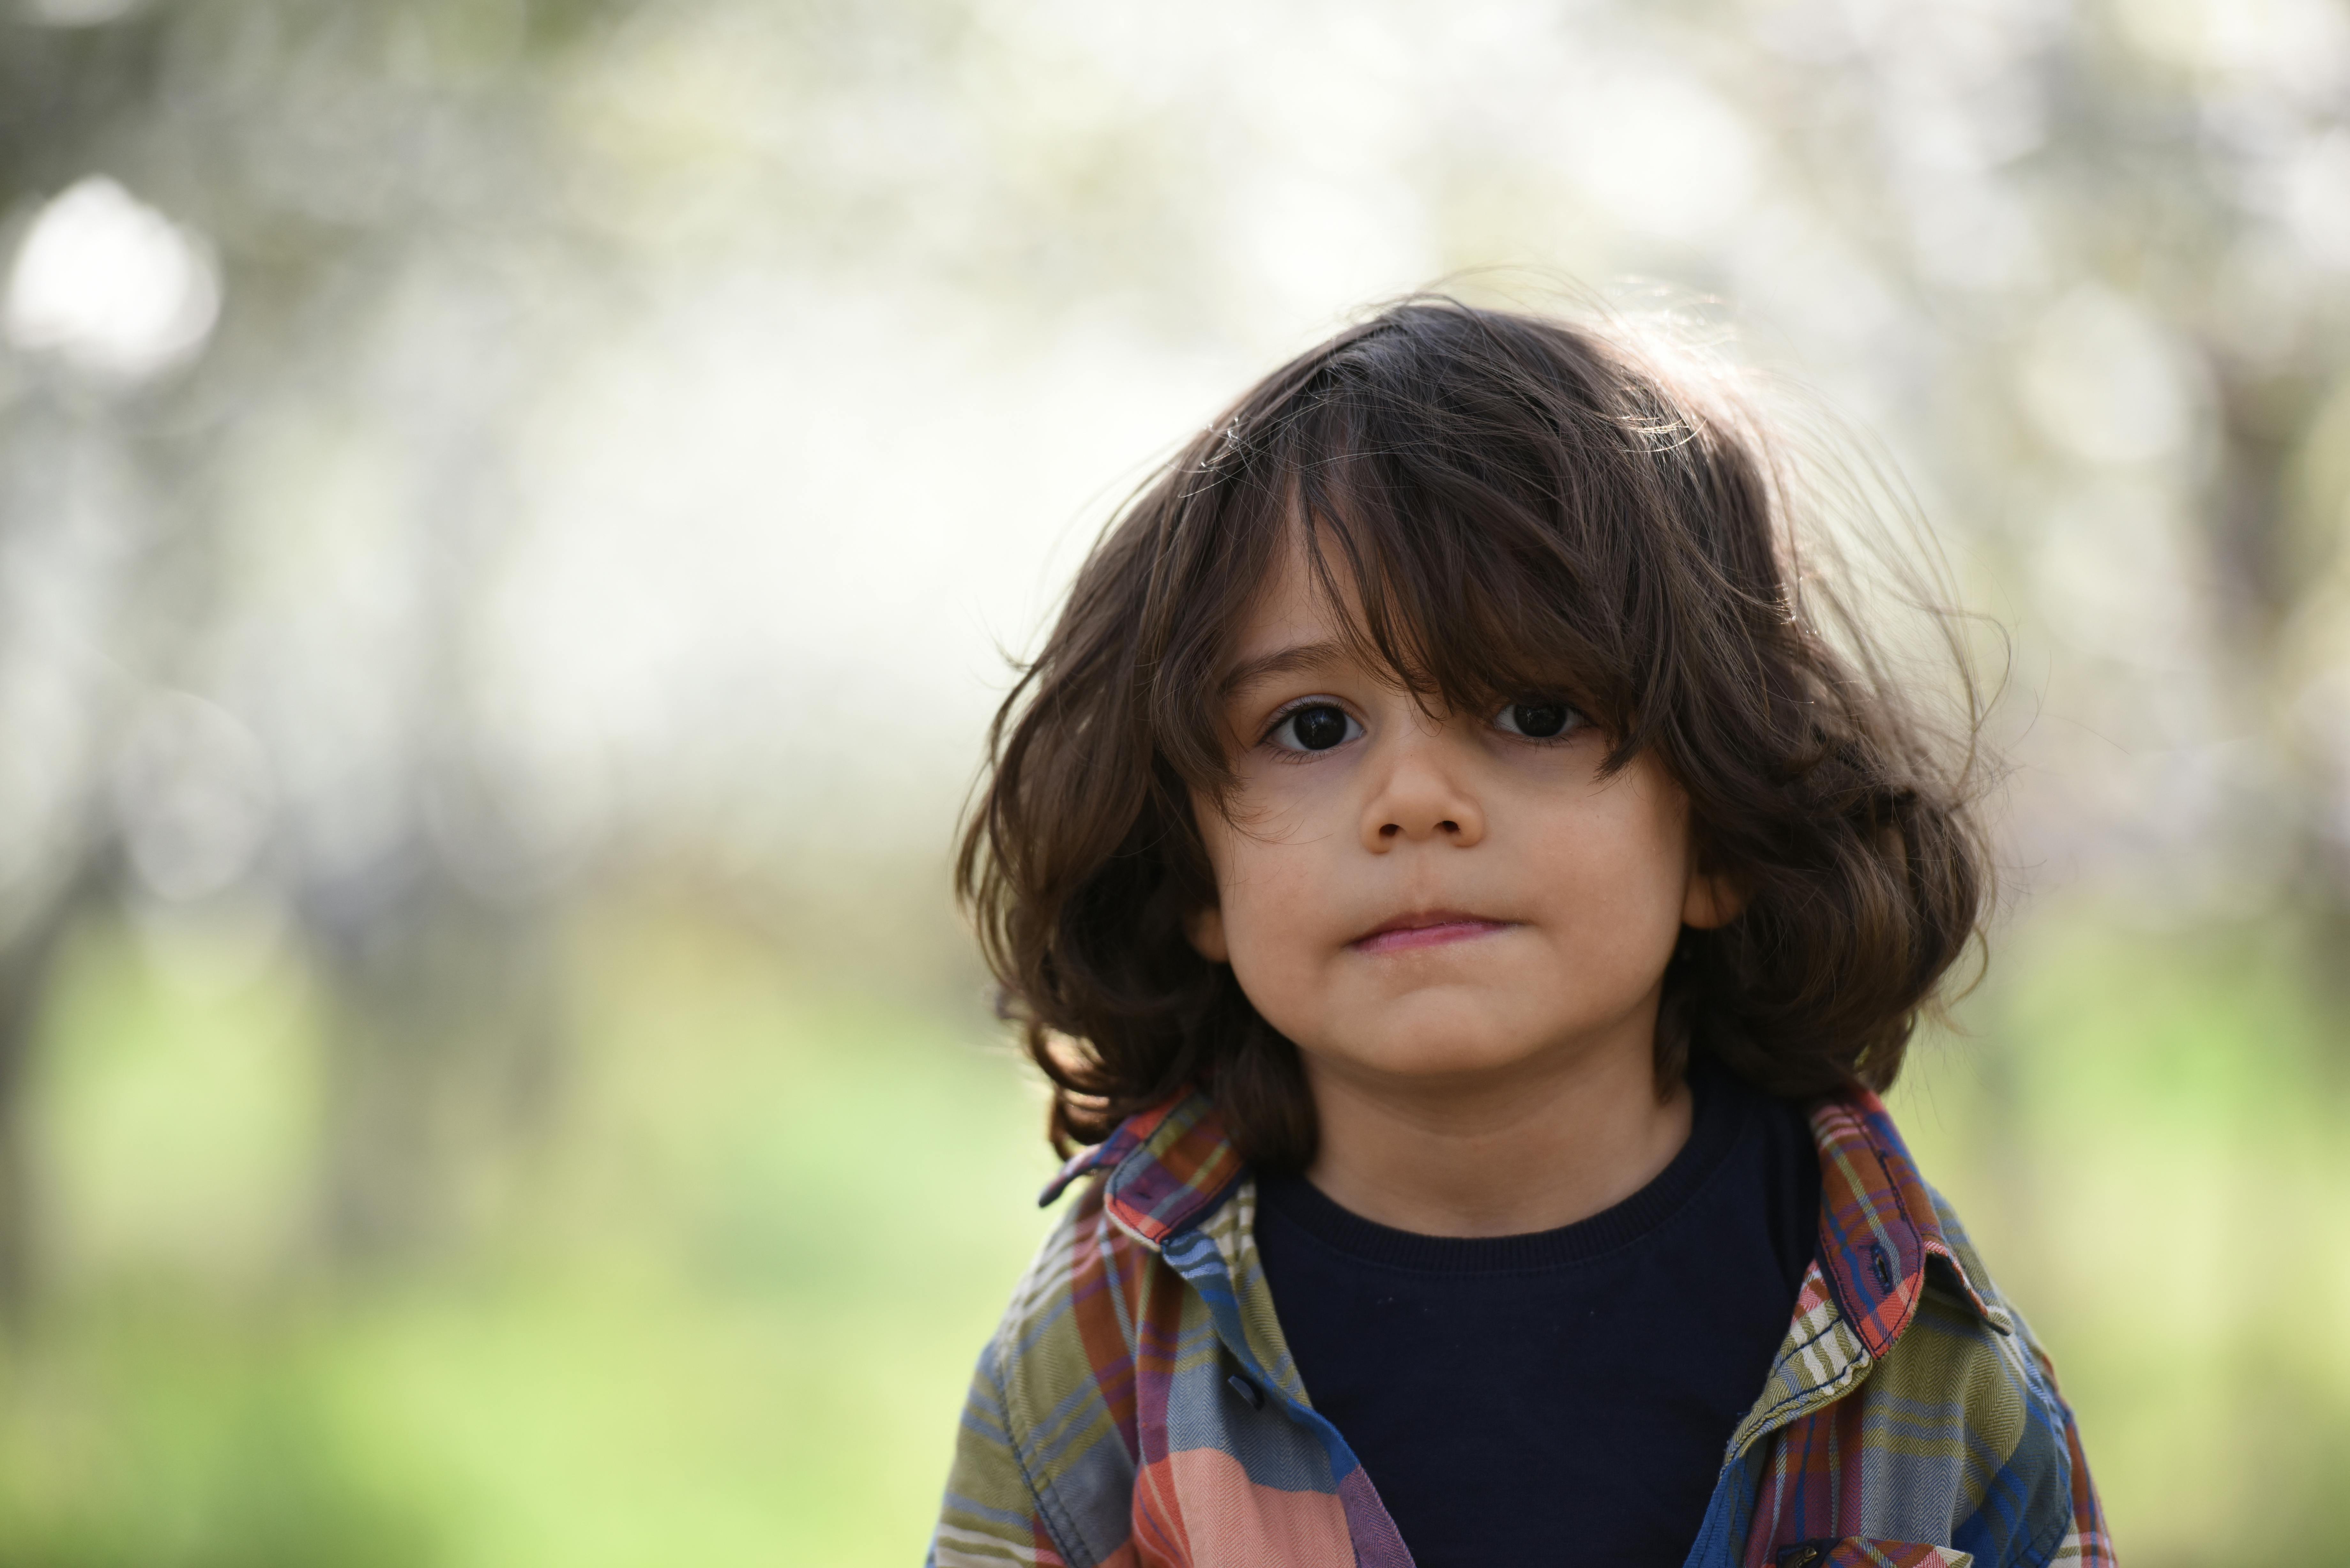 Young boy with a sad look | Source: Pexels